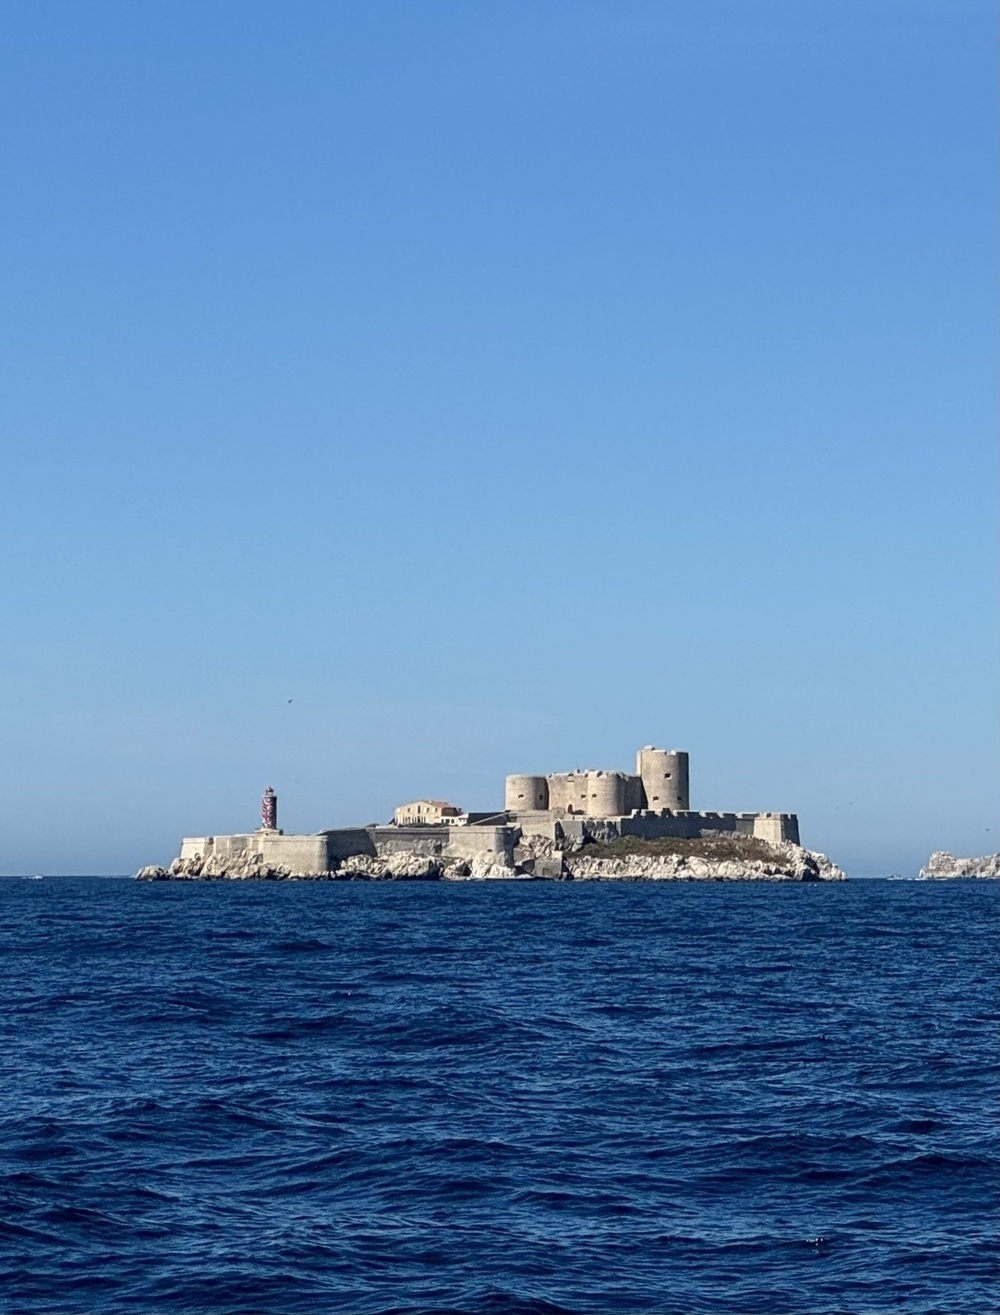 Château d’If on an island across the water.